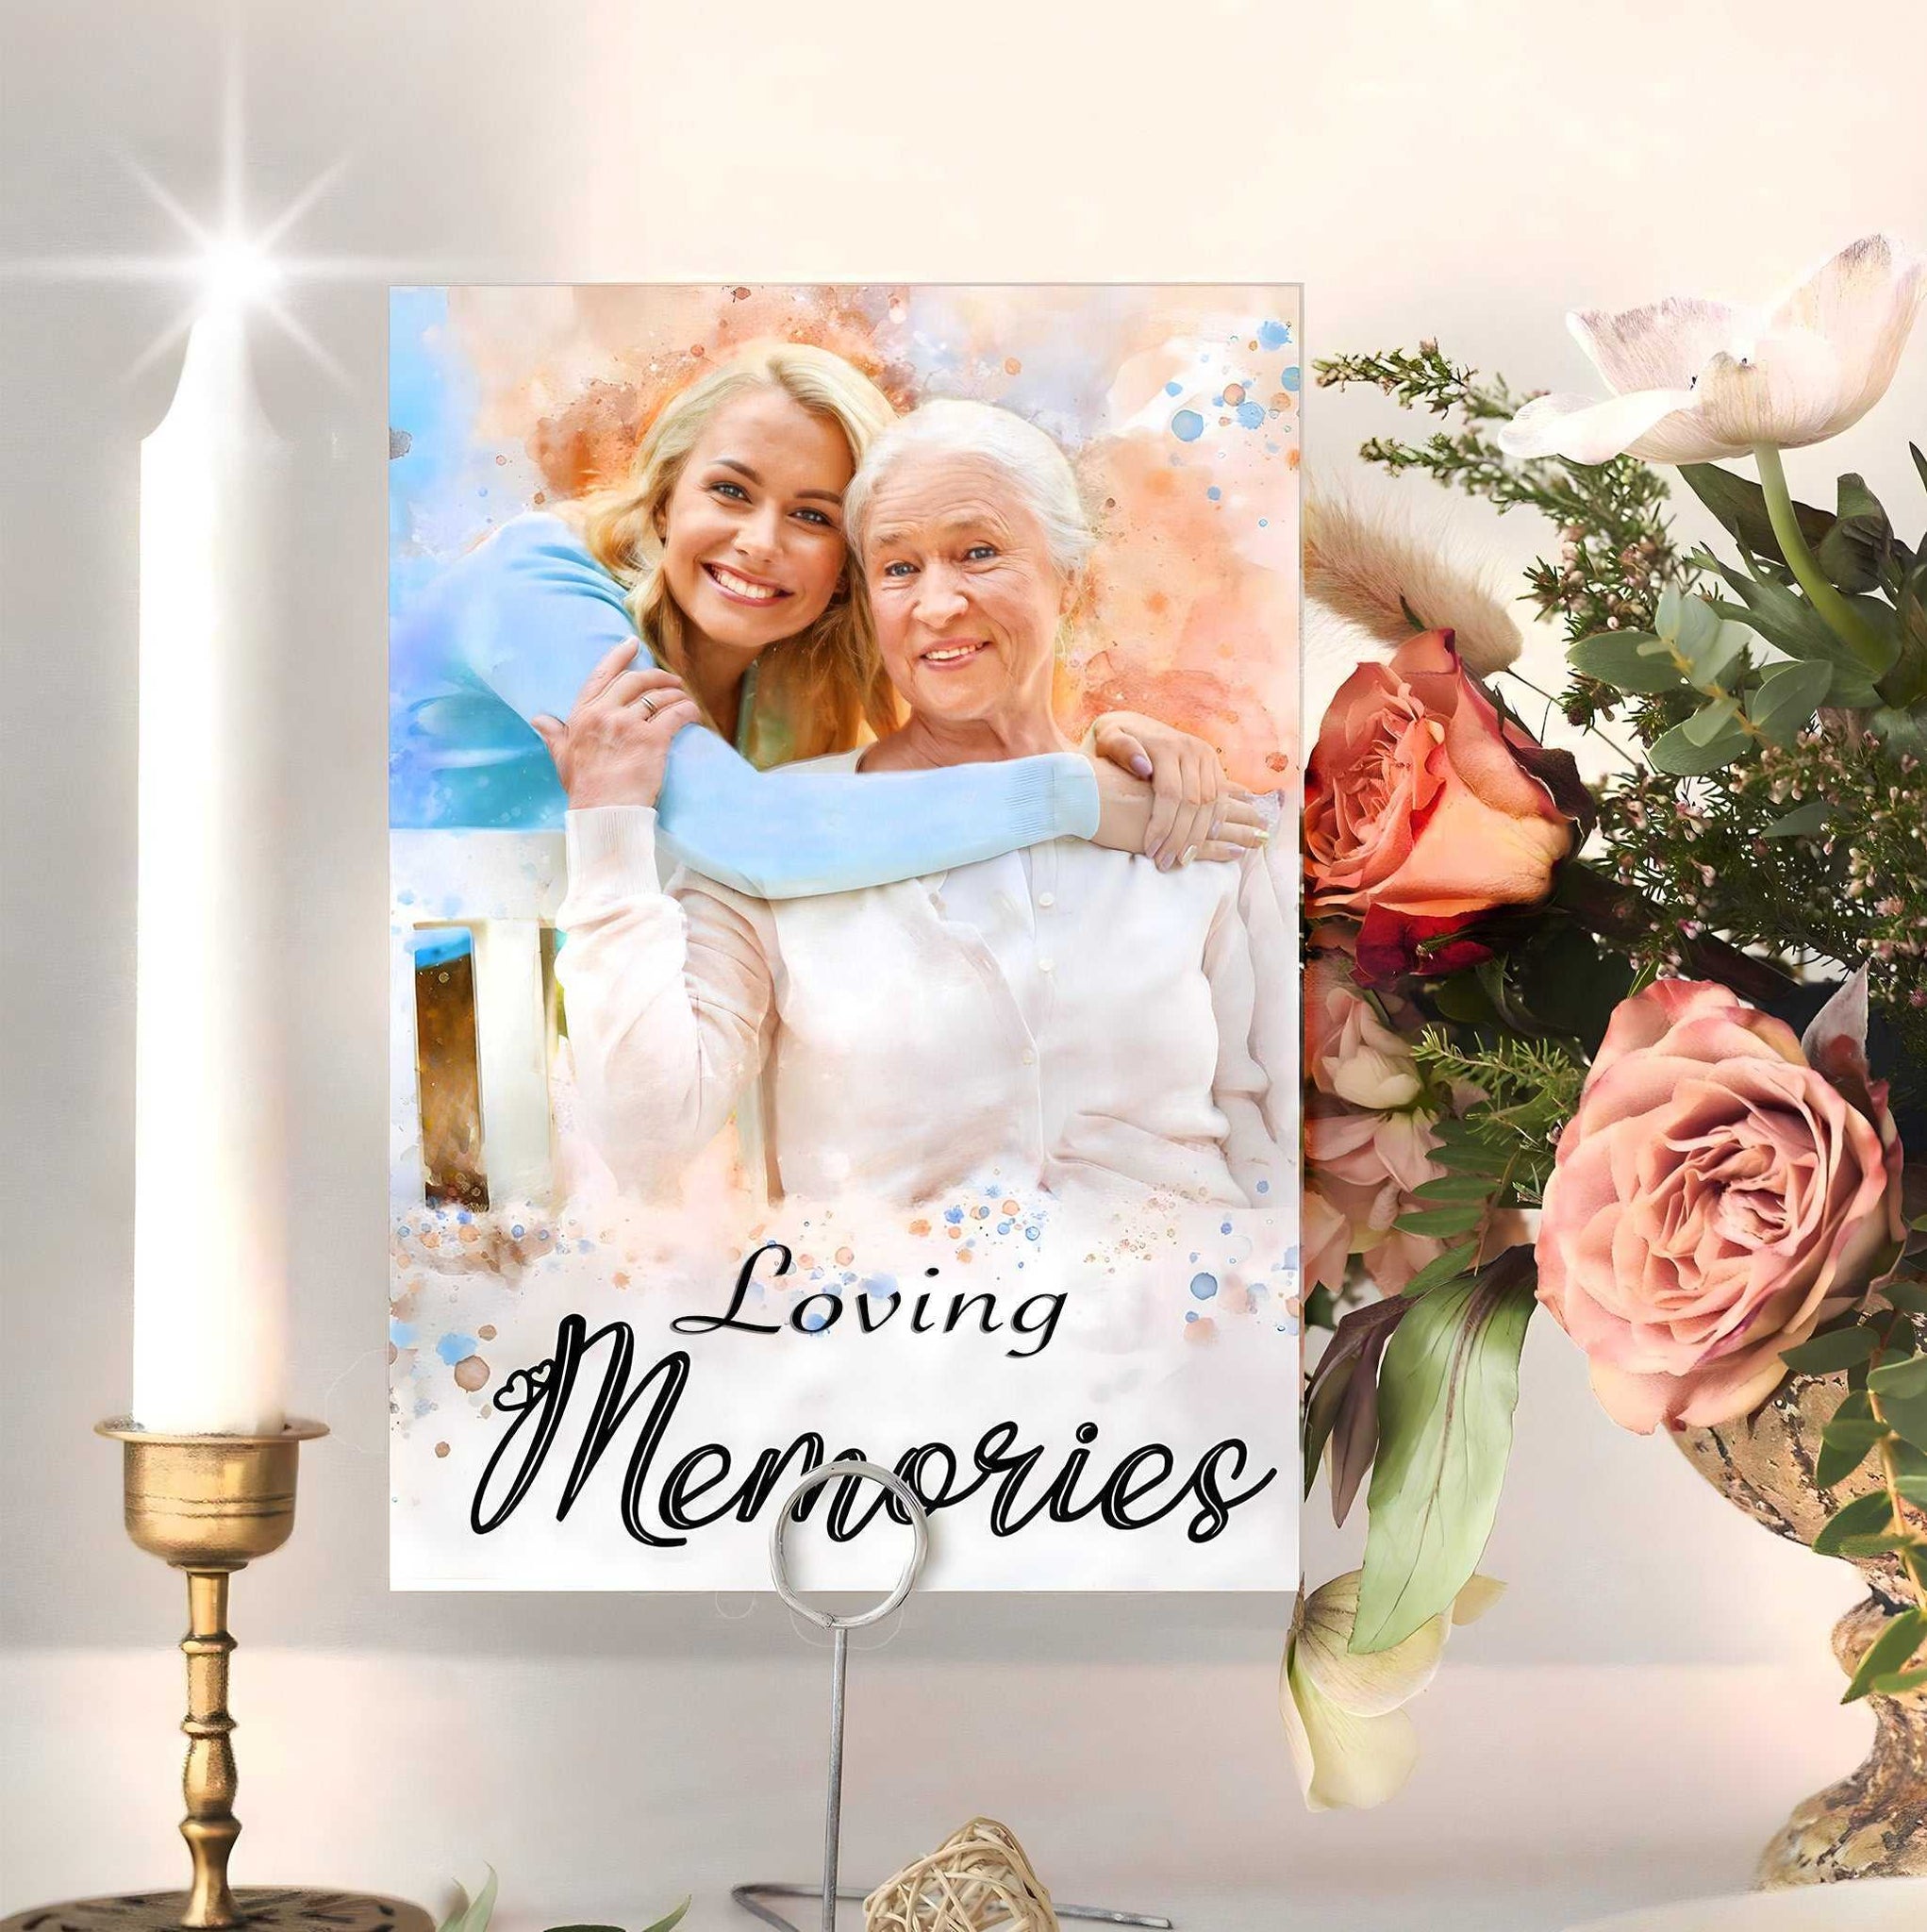 Add a Person to a Photo | Incorporating a Lost Loved One in Pictures | Picture with Deceased Loved One | Add Deceased Loved One To Photo - FromPicToArt